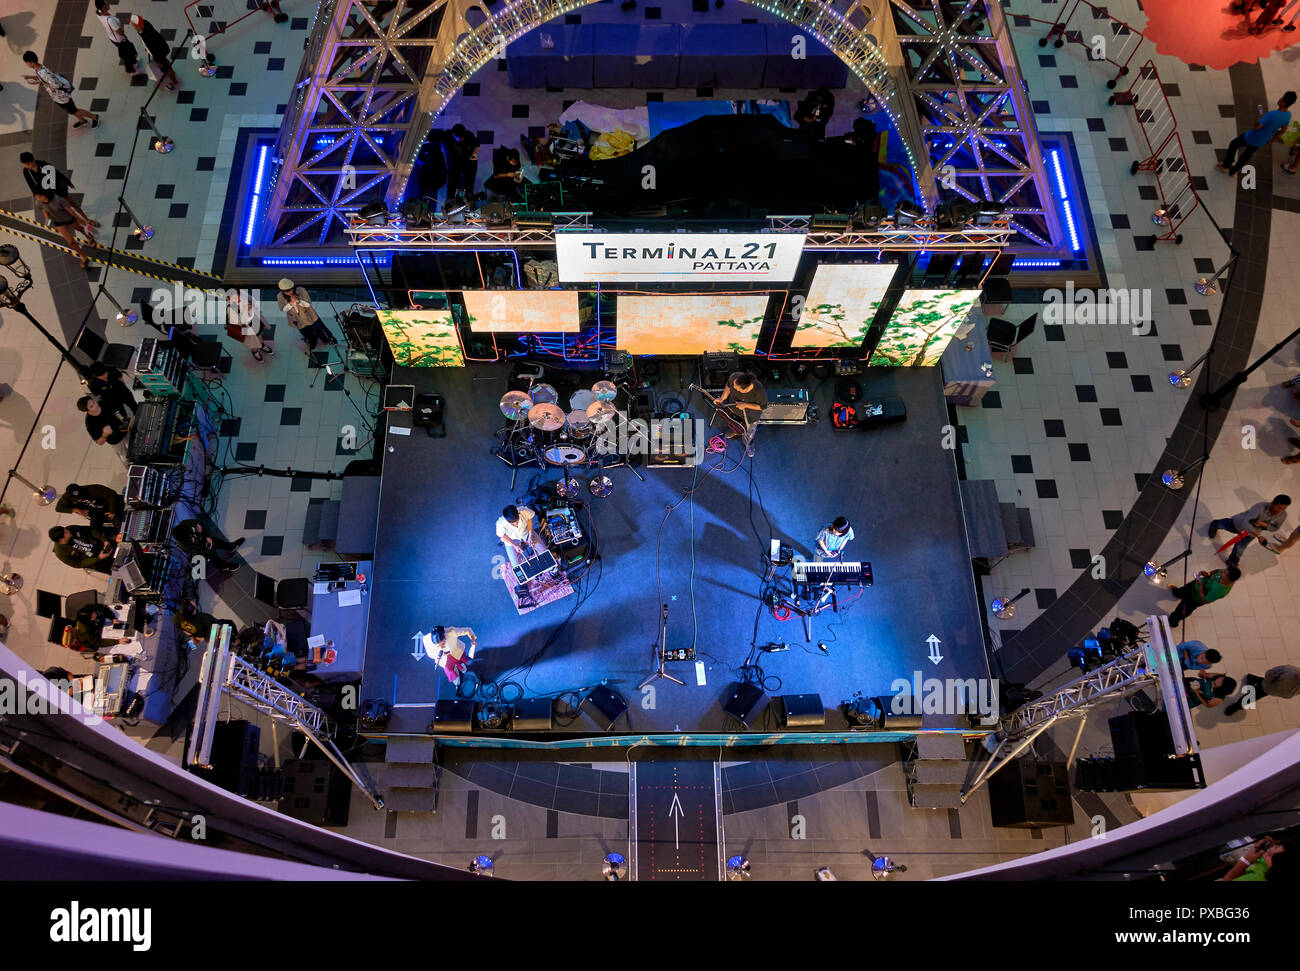 Overhead view of the stage at the Terminal 21 shopping mall, Pattaya. Thailand , Southeast Asia Stock Photo